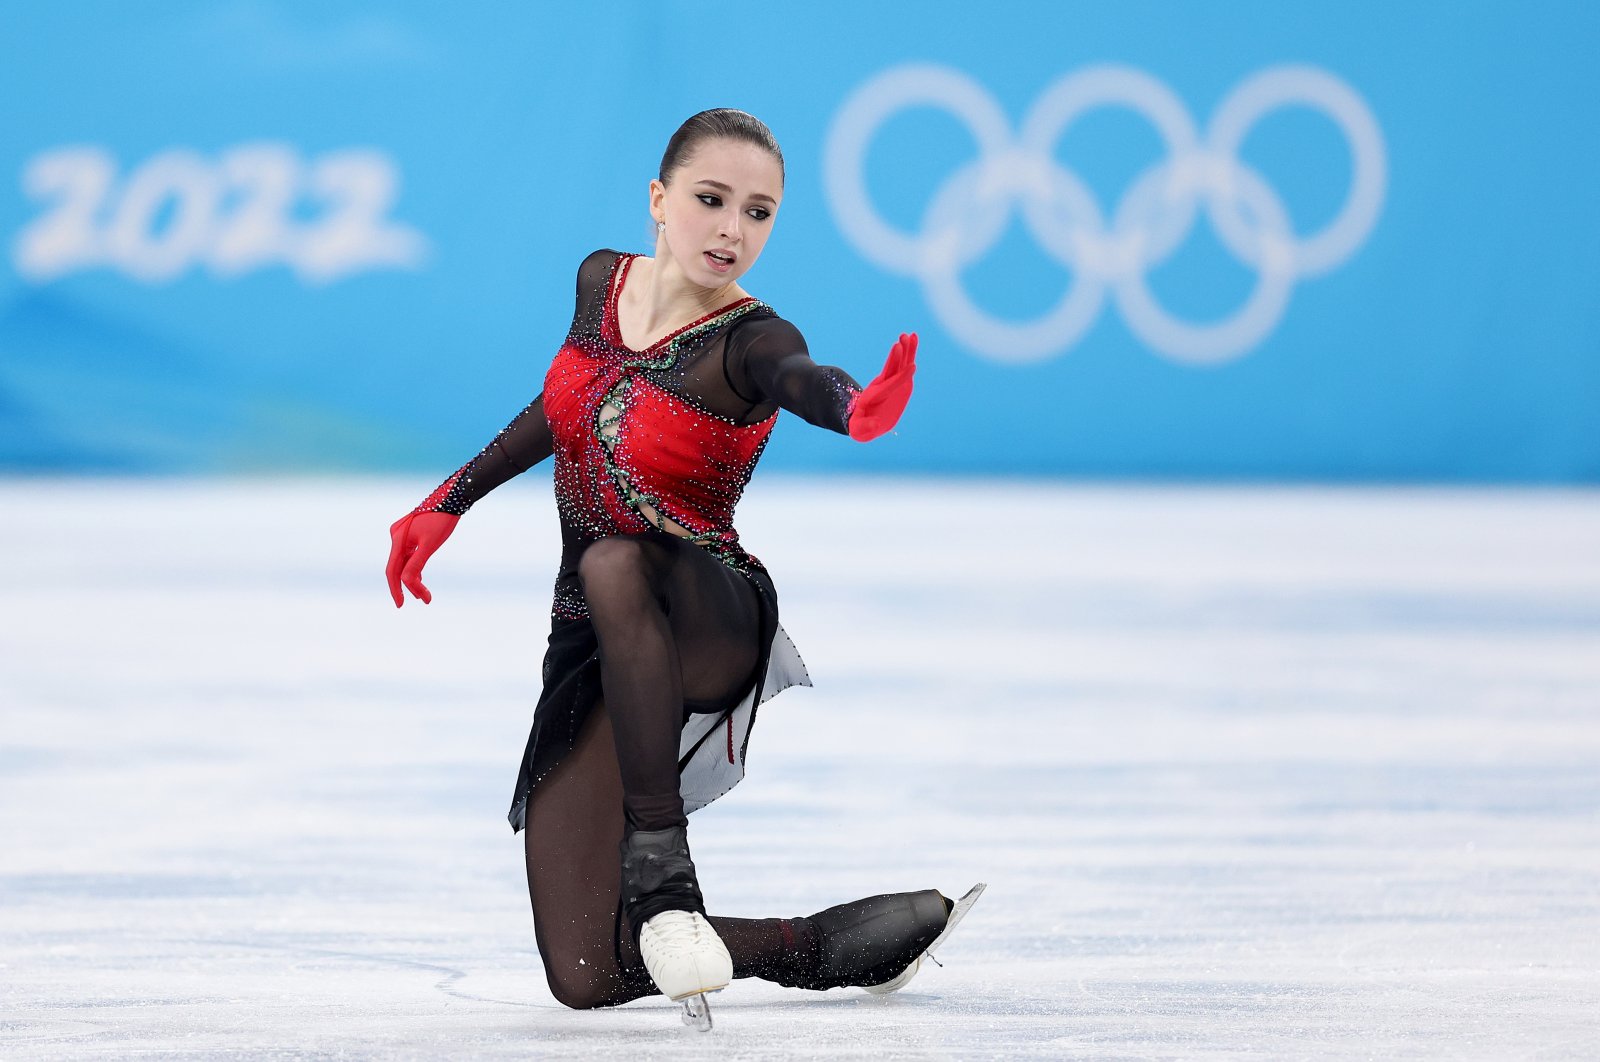 Russia&#039;s Kamila Valieva skates during the Women Single Skating Free Skating on Day 13 of the Beijing 2022 Winter Olympic Games at Capital Indoor Stadium, Beijing, China, Feb. 17, 2022. (Getty Images Photo)